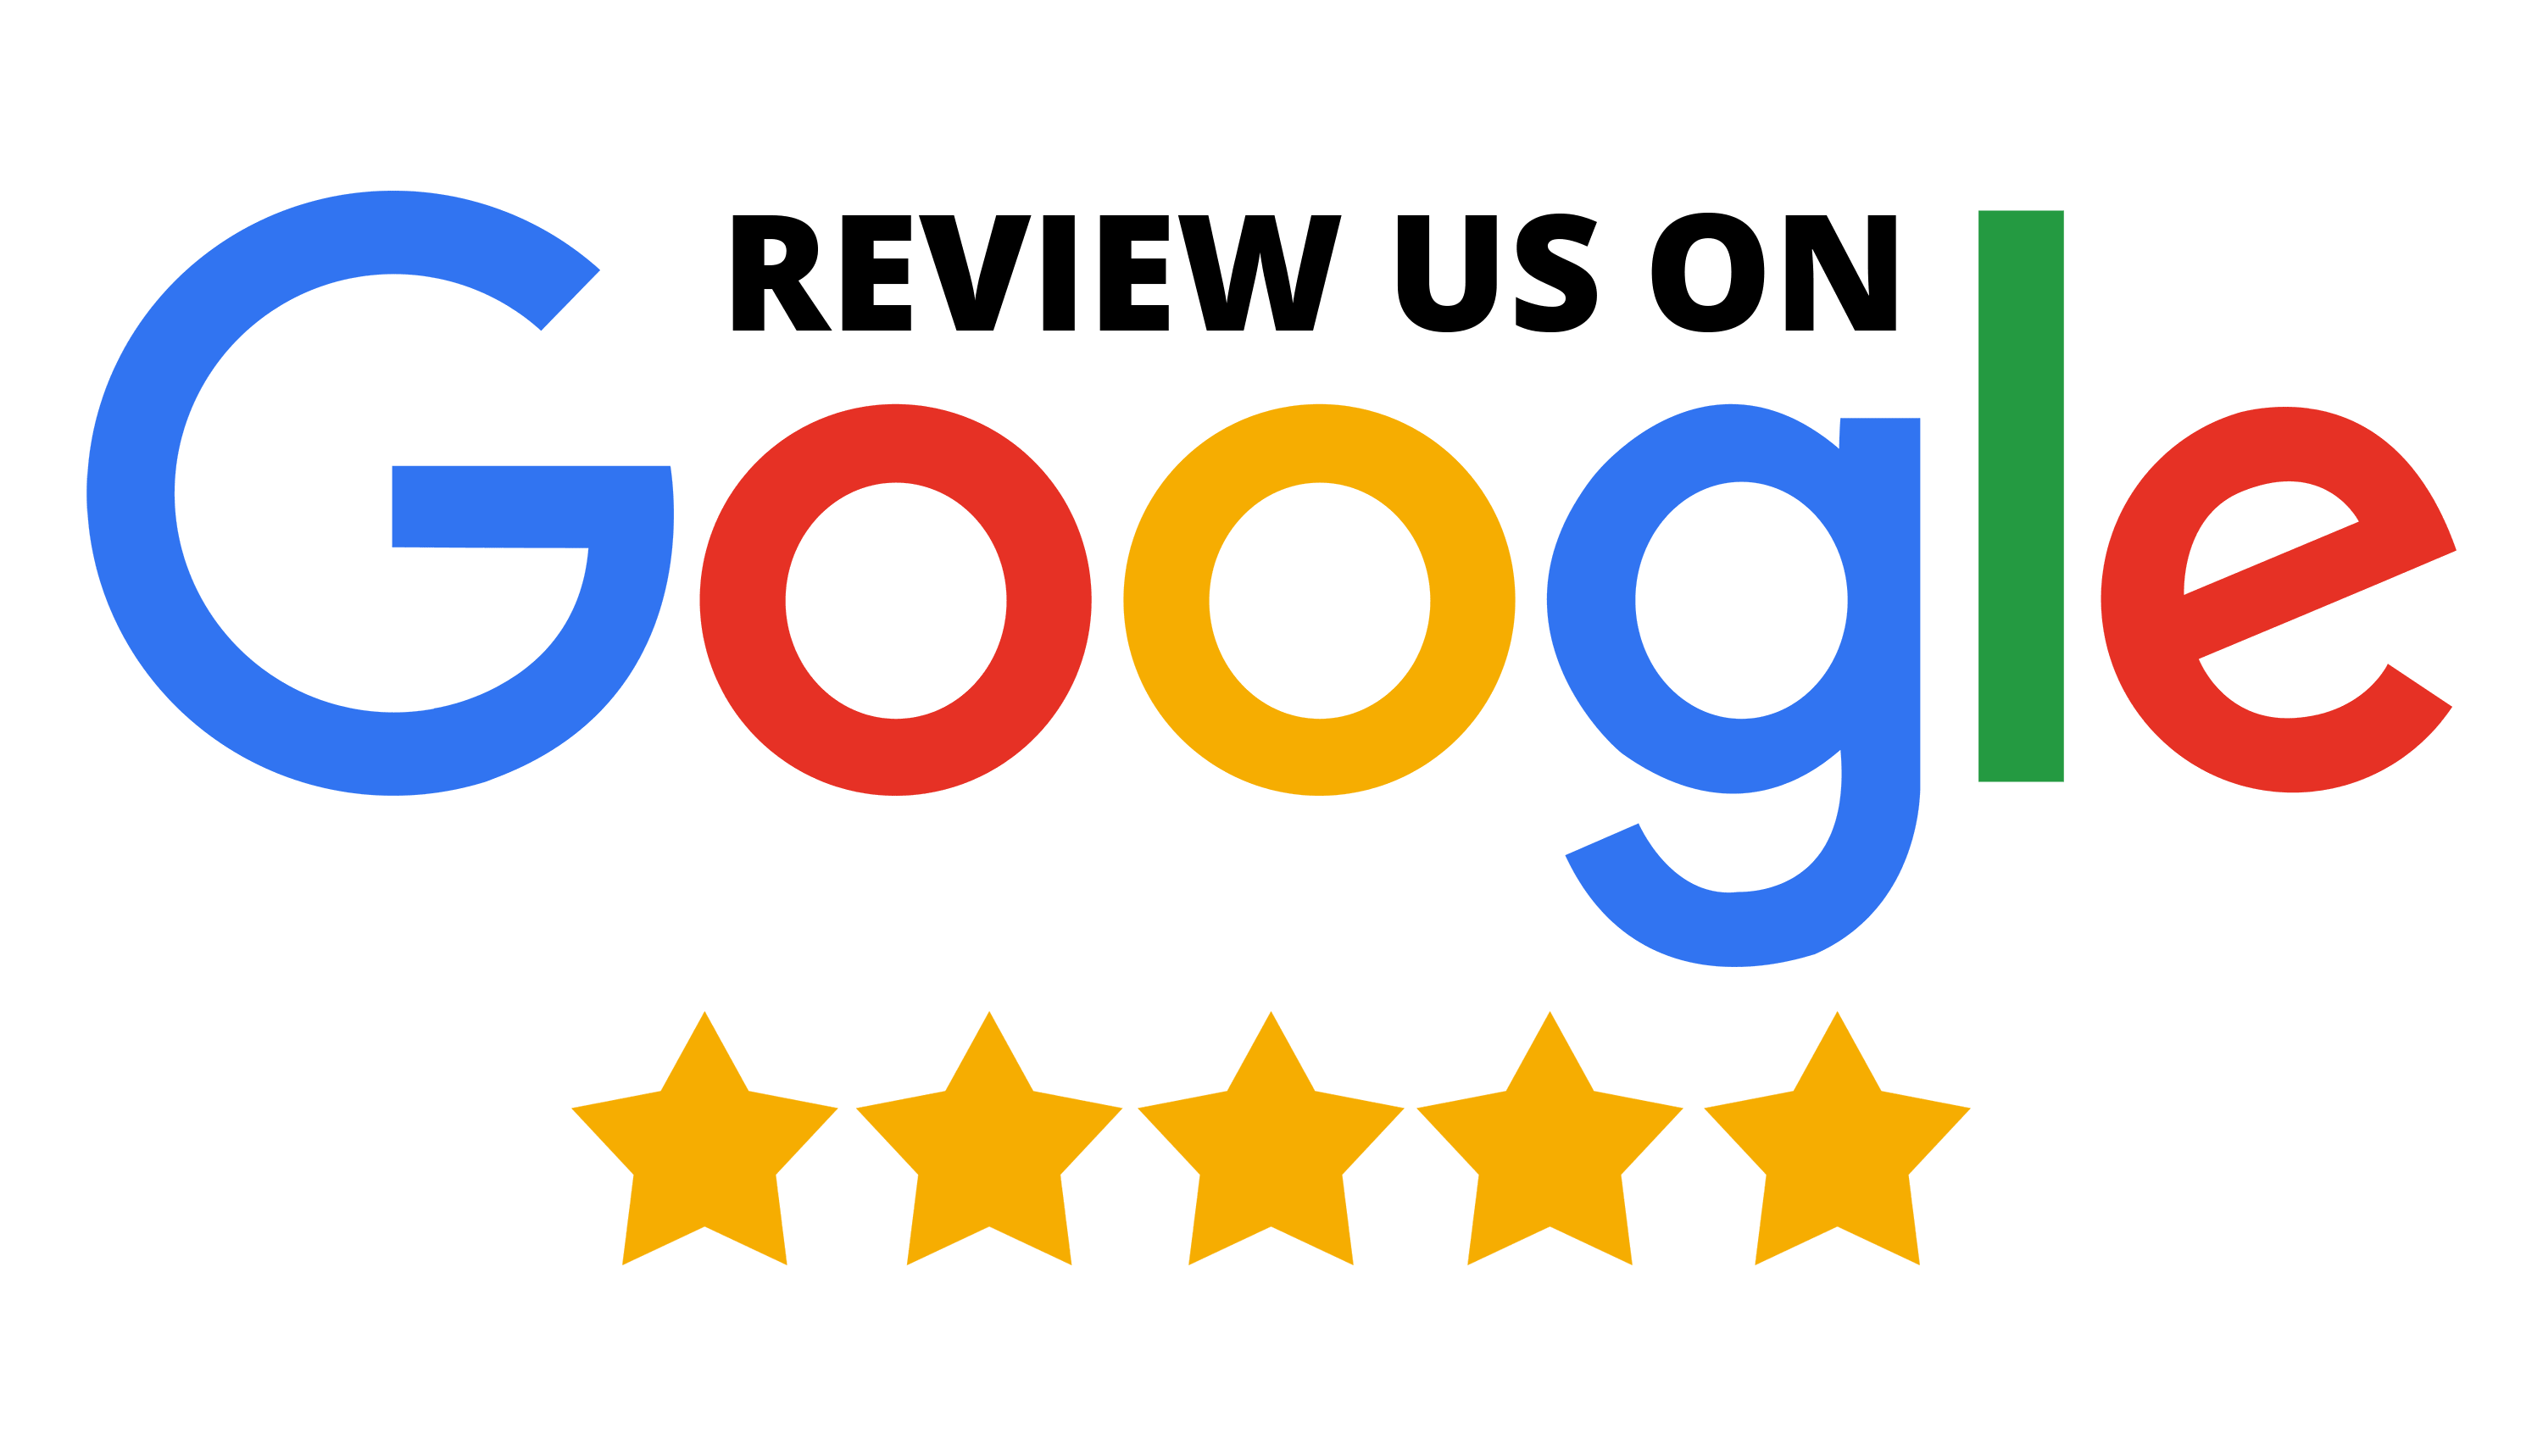 Review us on Google 